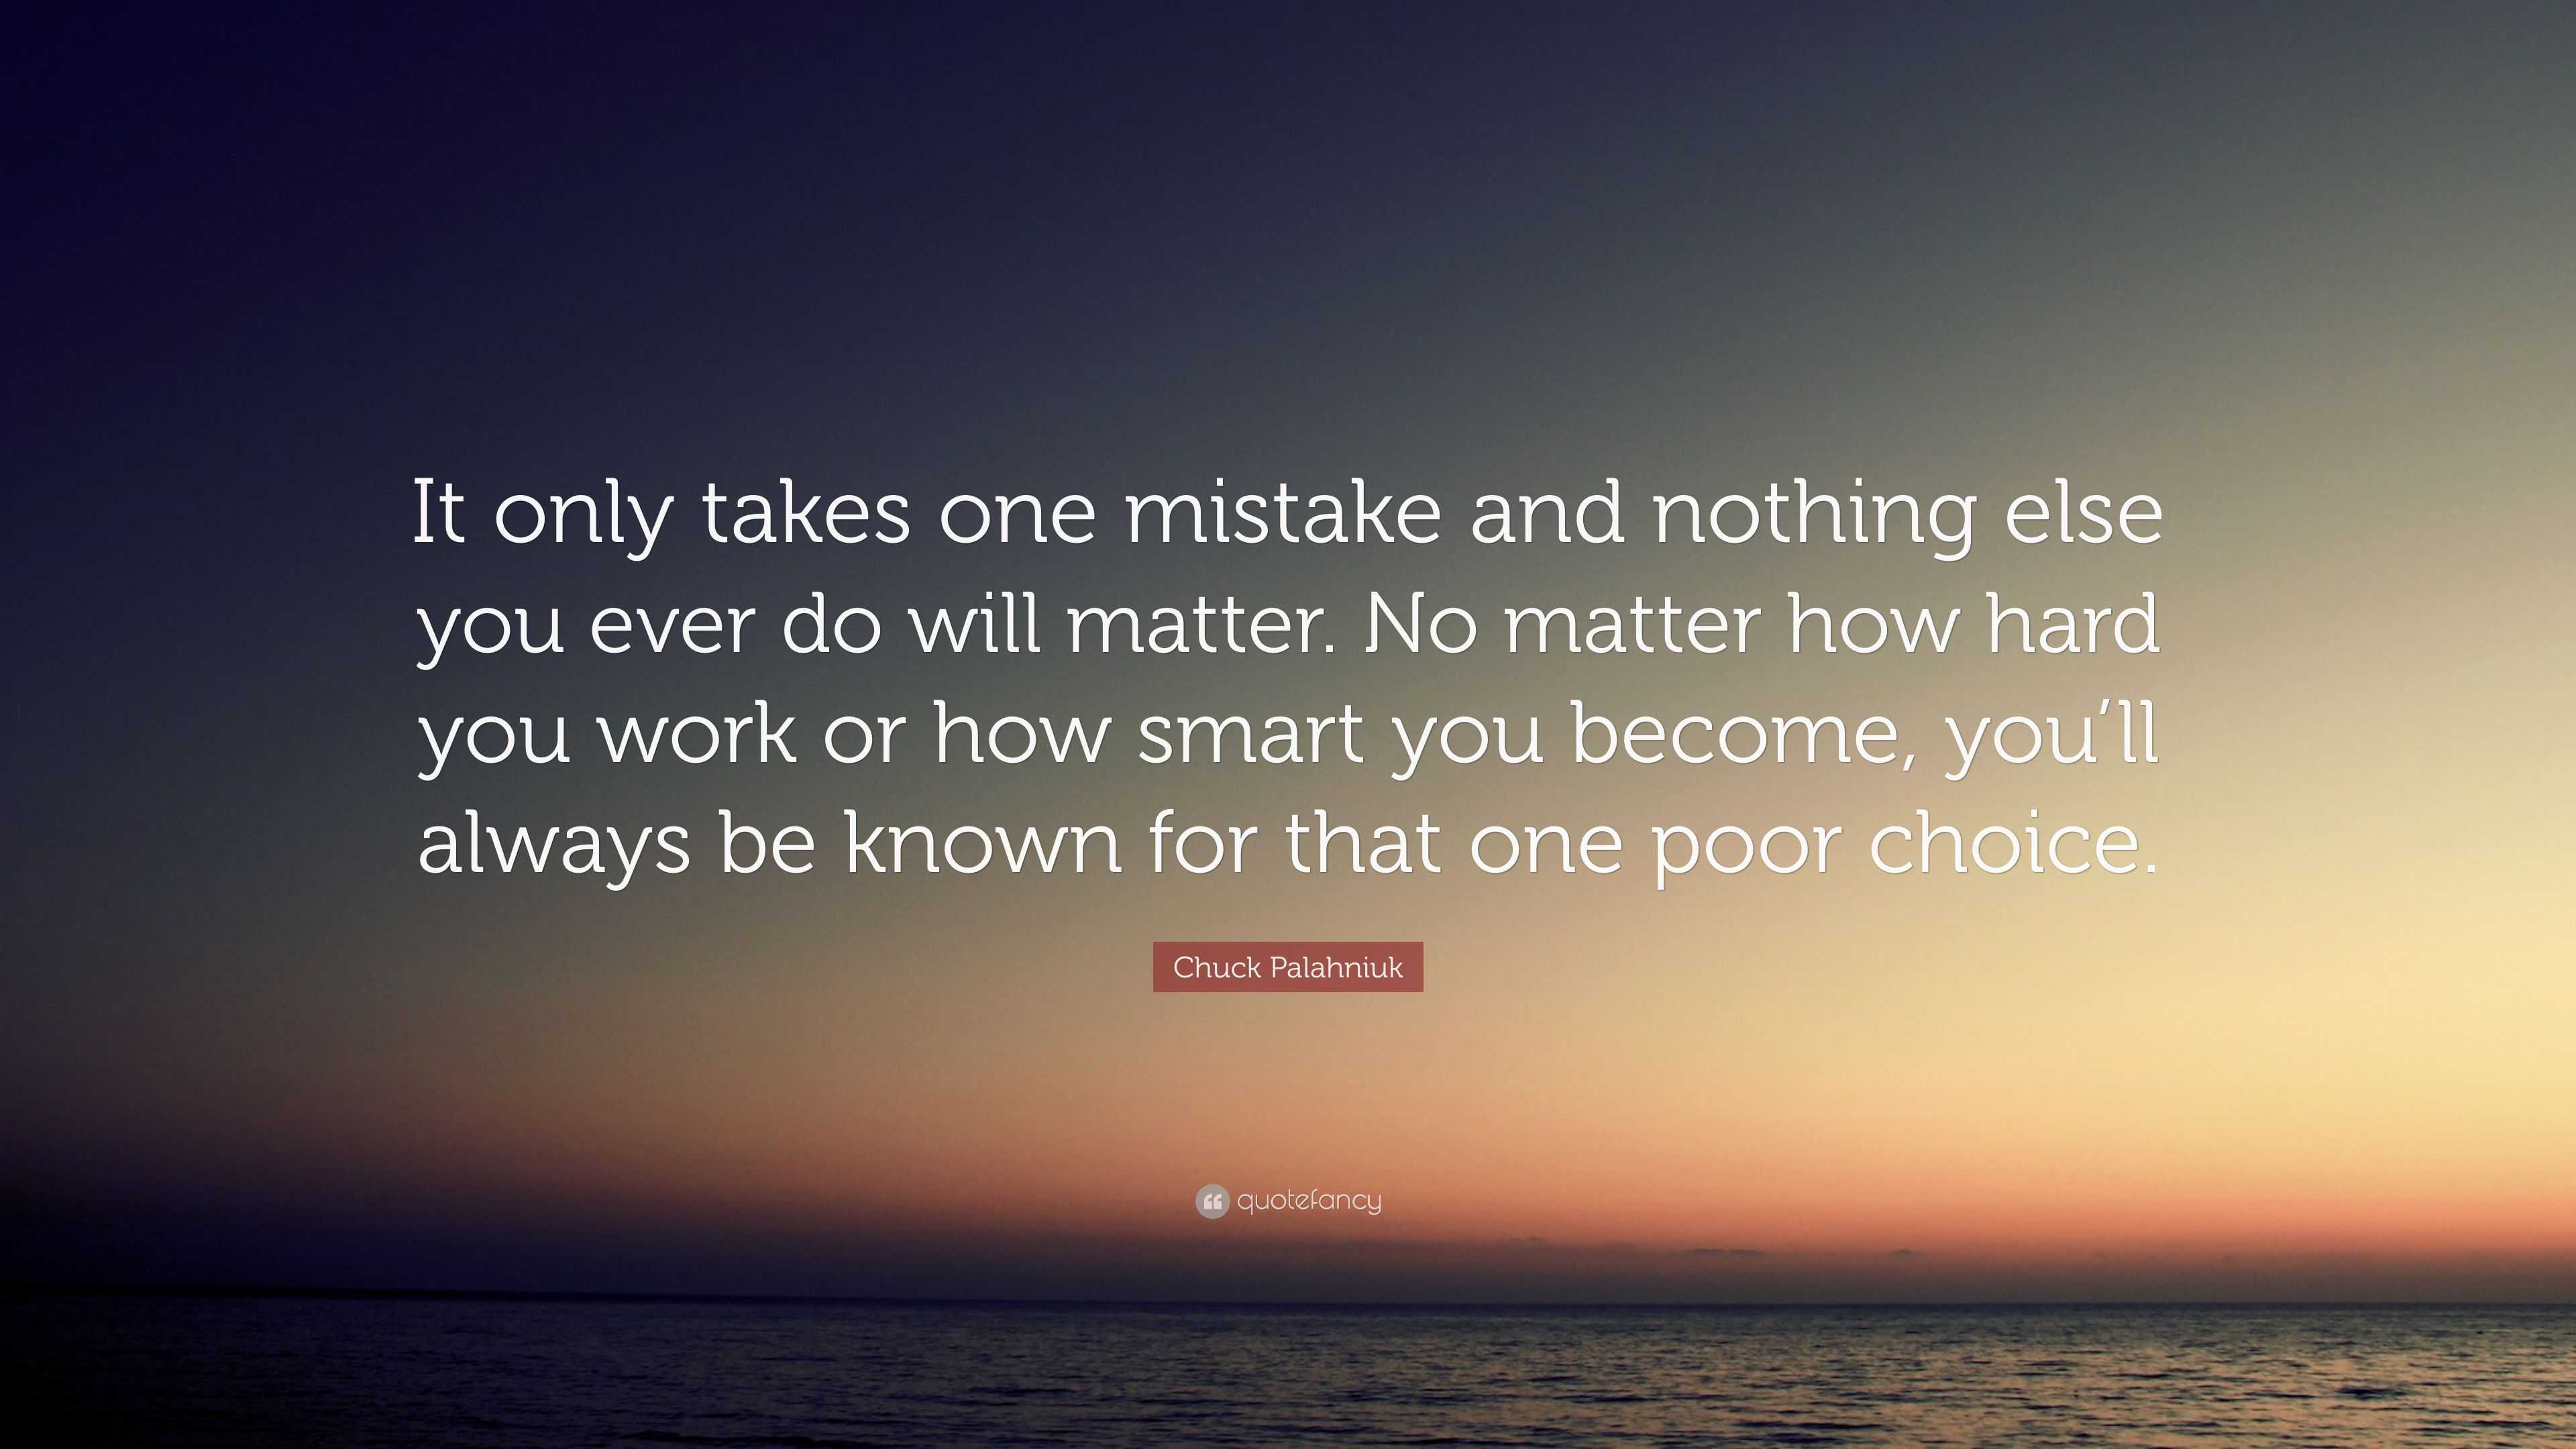 Chuck Palahniuk Quote “It only takes one mistake and nothing else you ever do